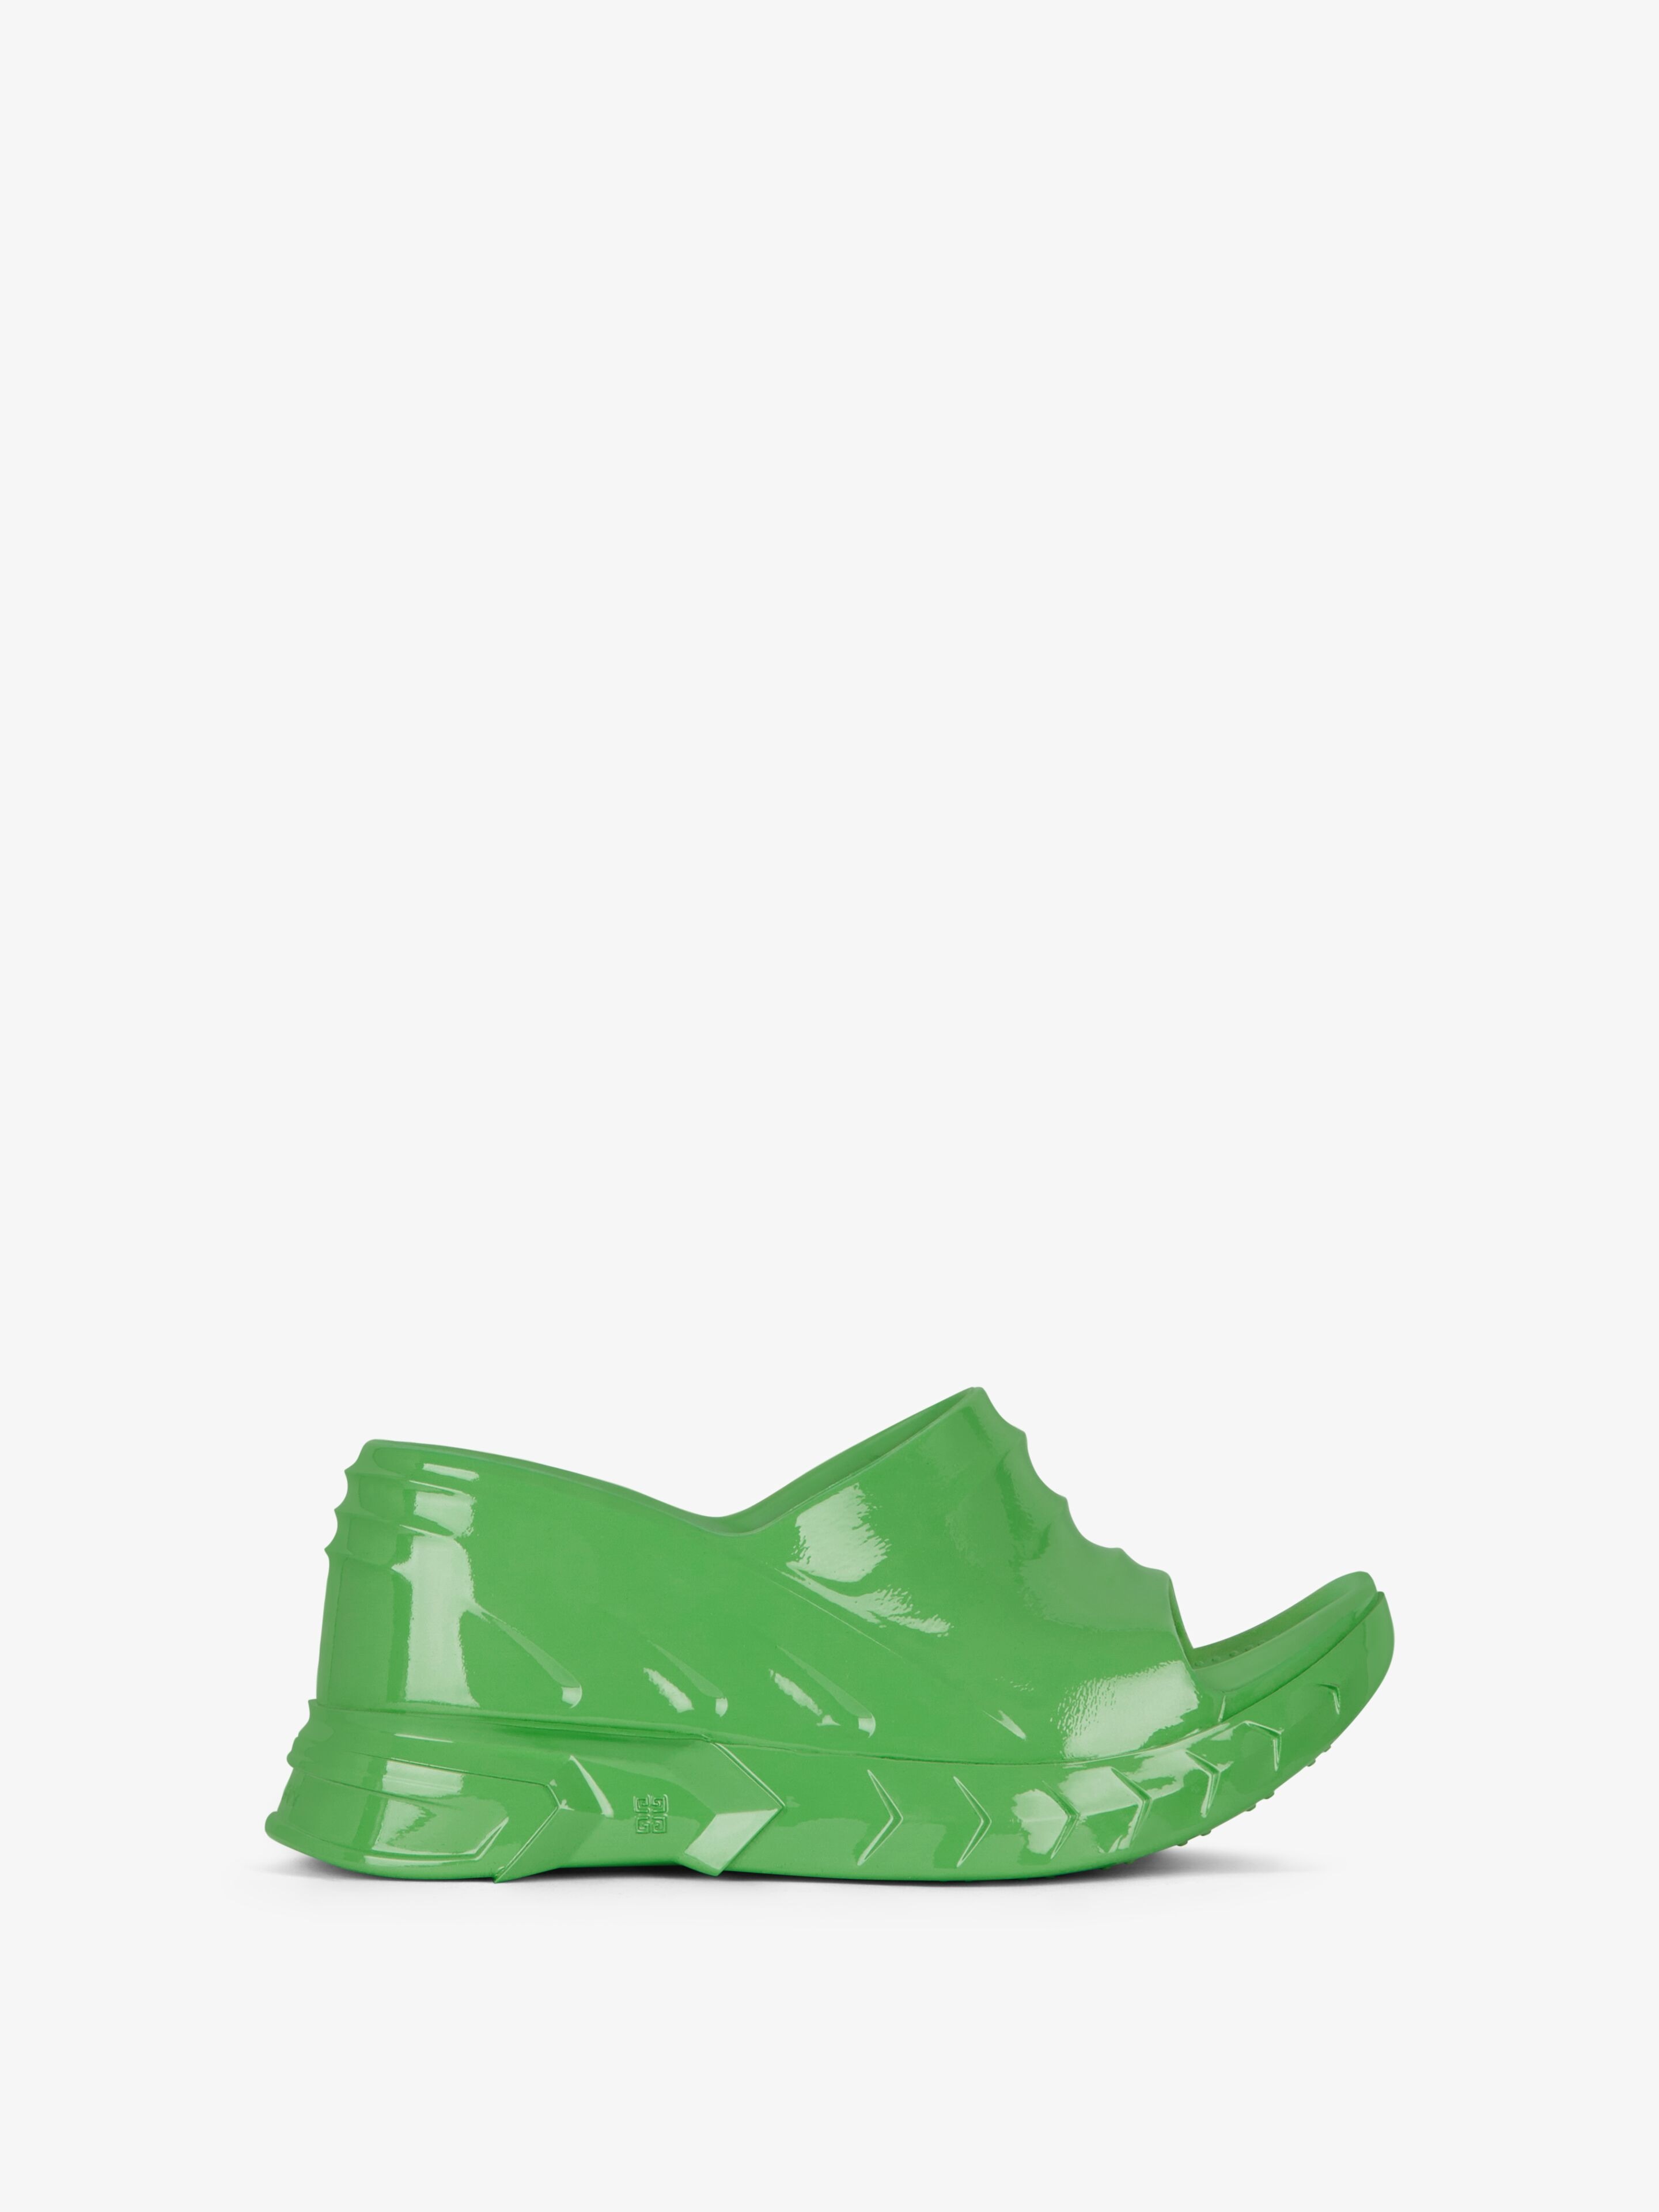 Givenchy Marshmallow Wedge Sandals In Rubber In Green